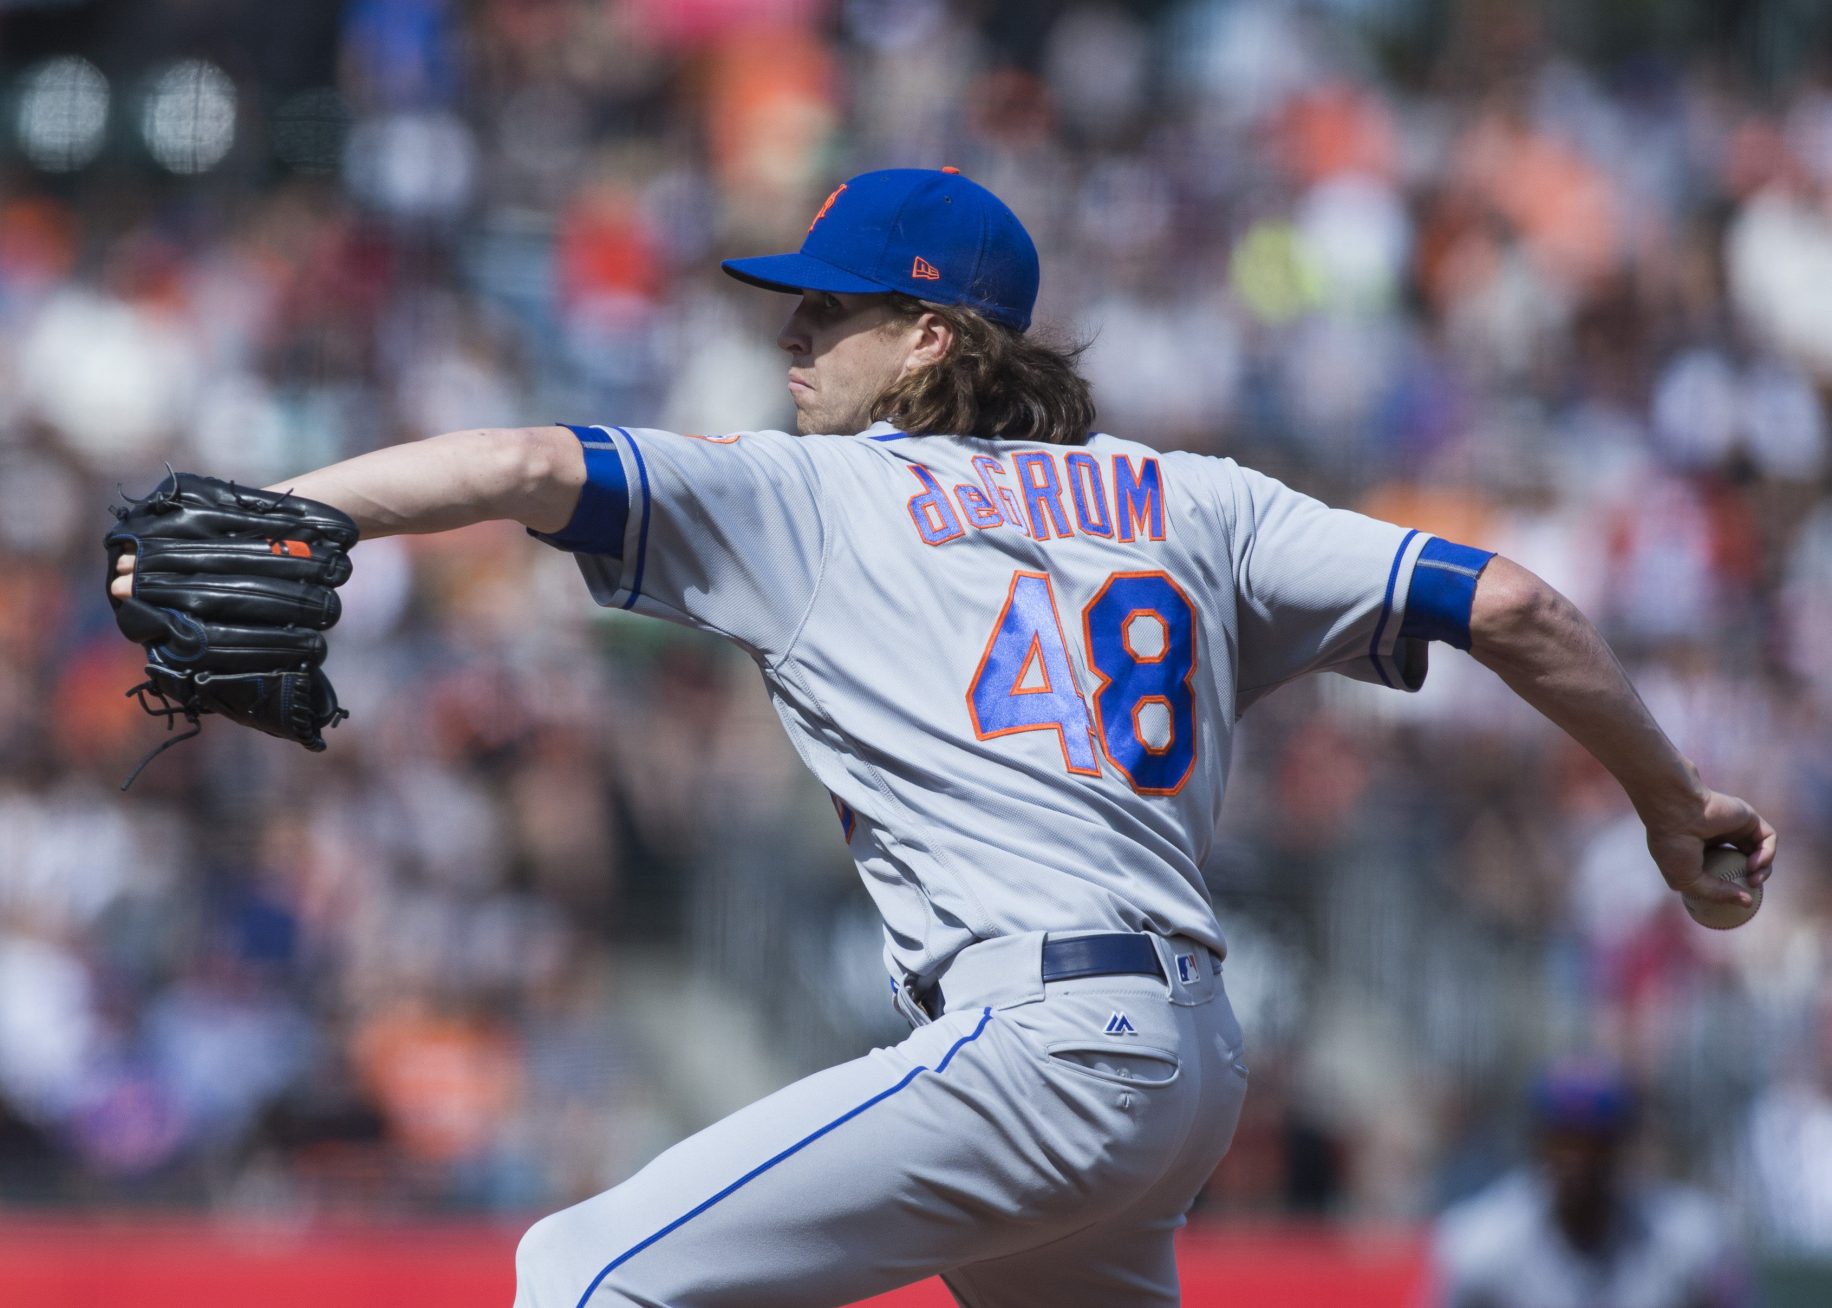 New York Mets: Jacob deGrom Stellar in Club's 2nd Straight Win in San Francisco 1